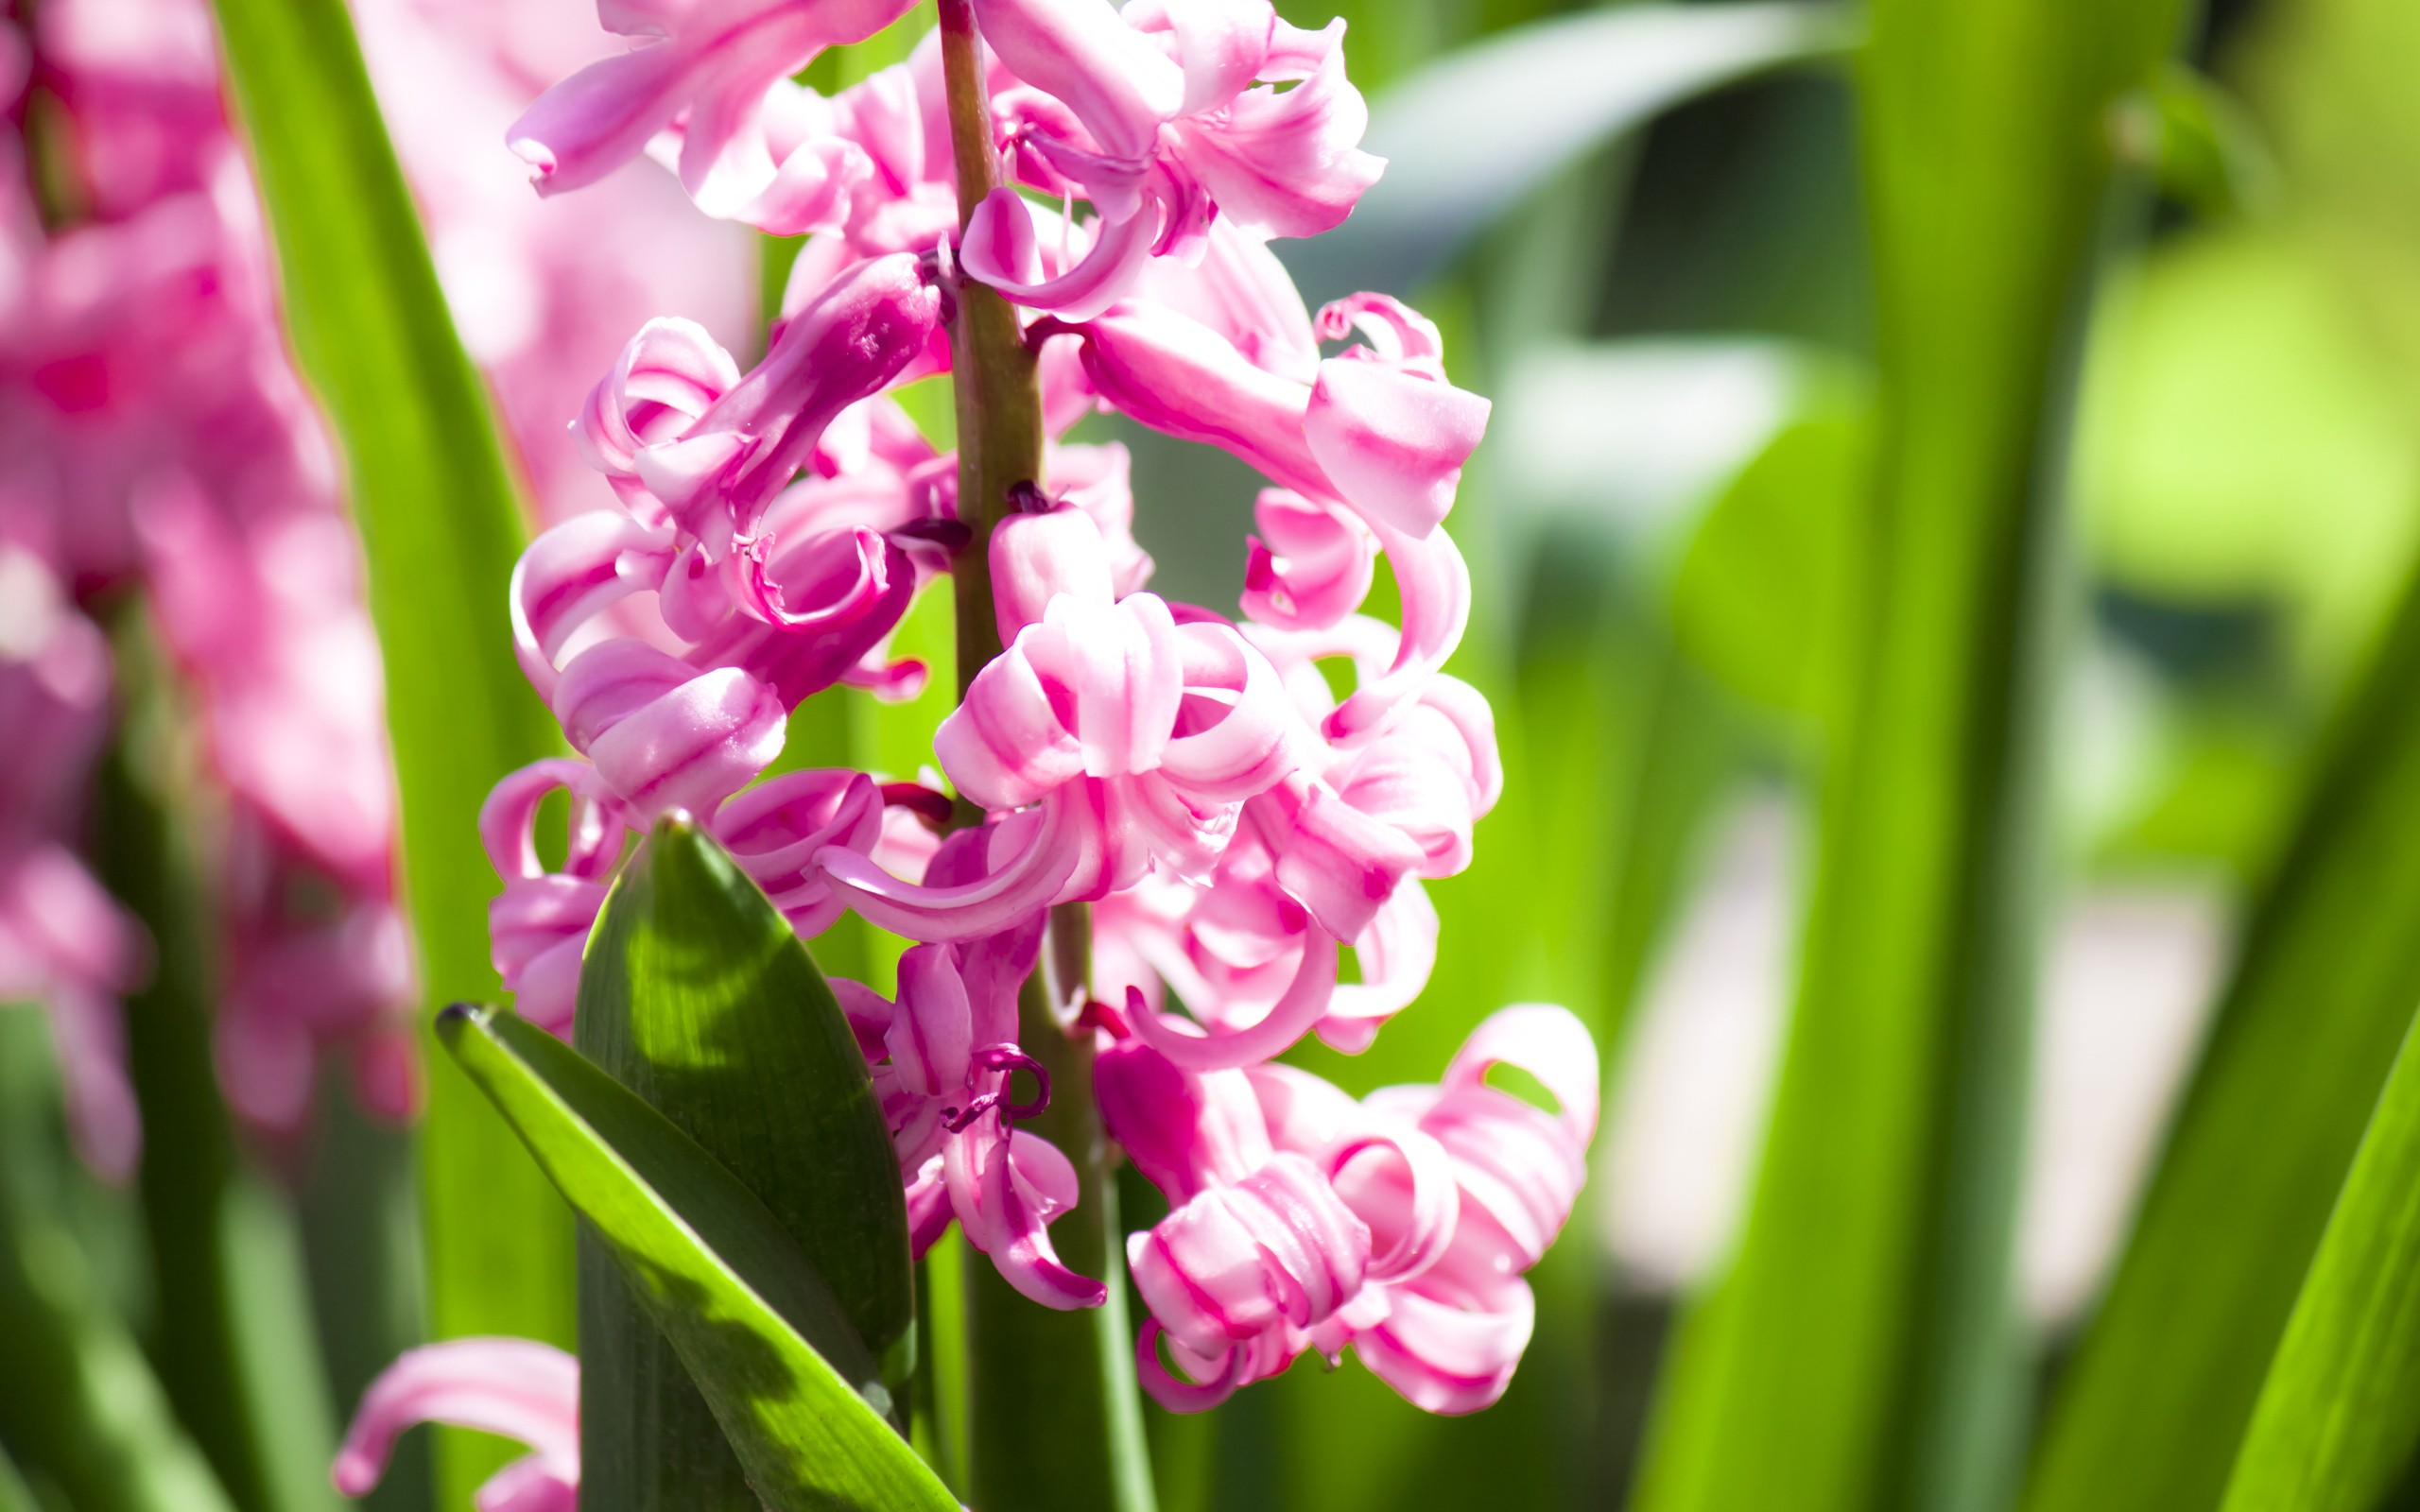 General 2560x1600 flowers pink flowers garden plants hyacinth nature